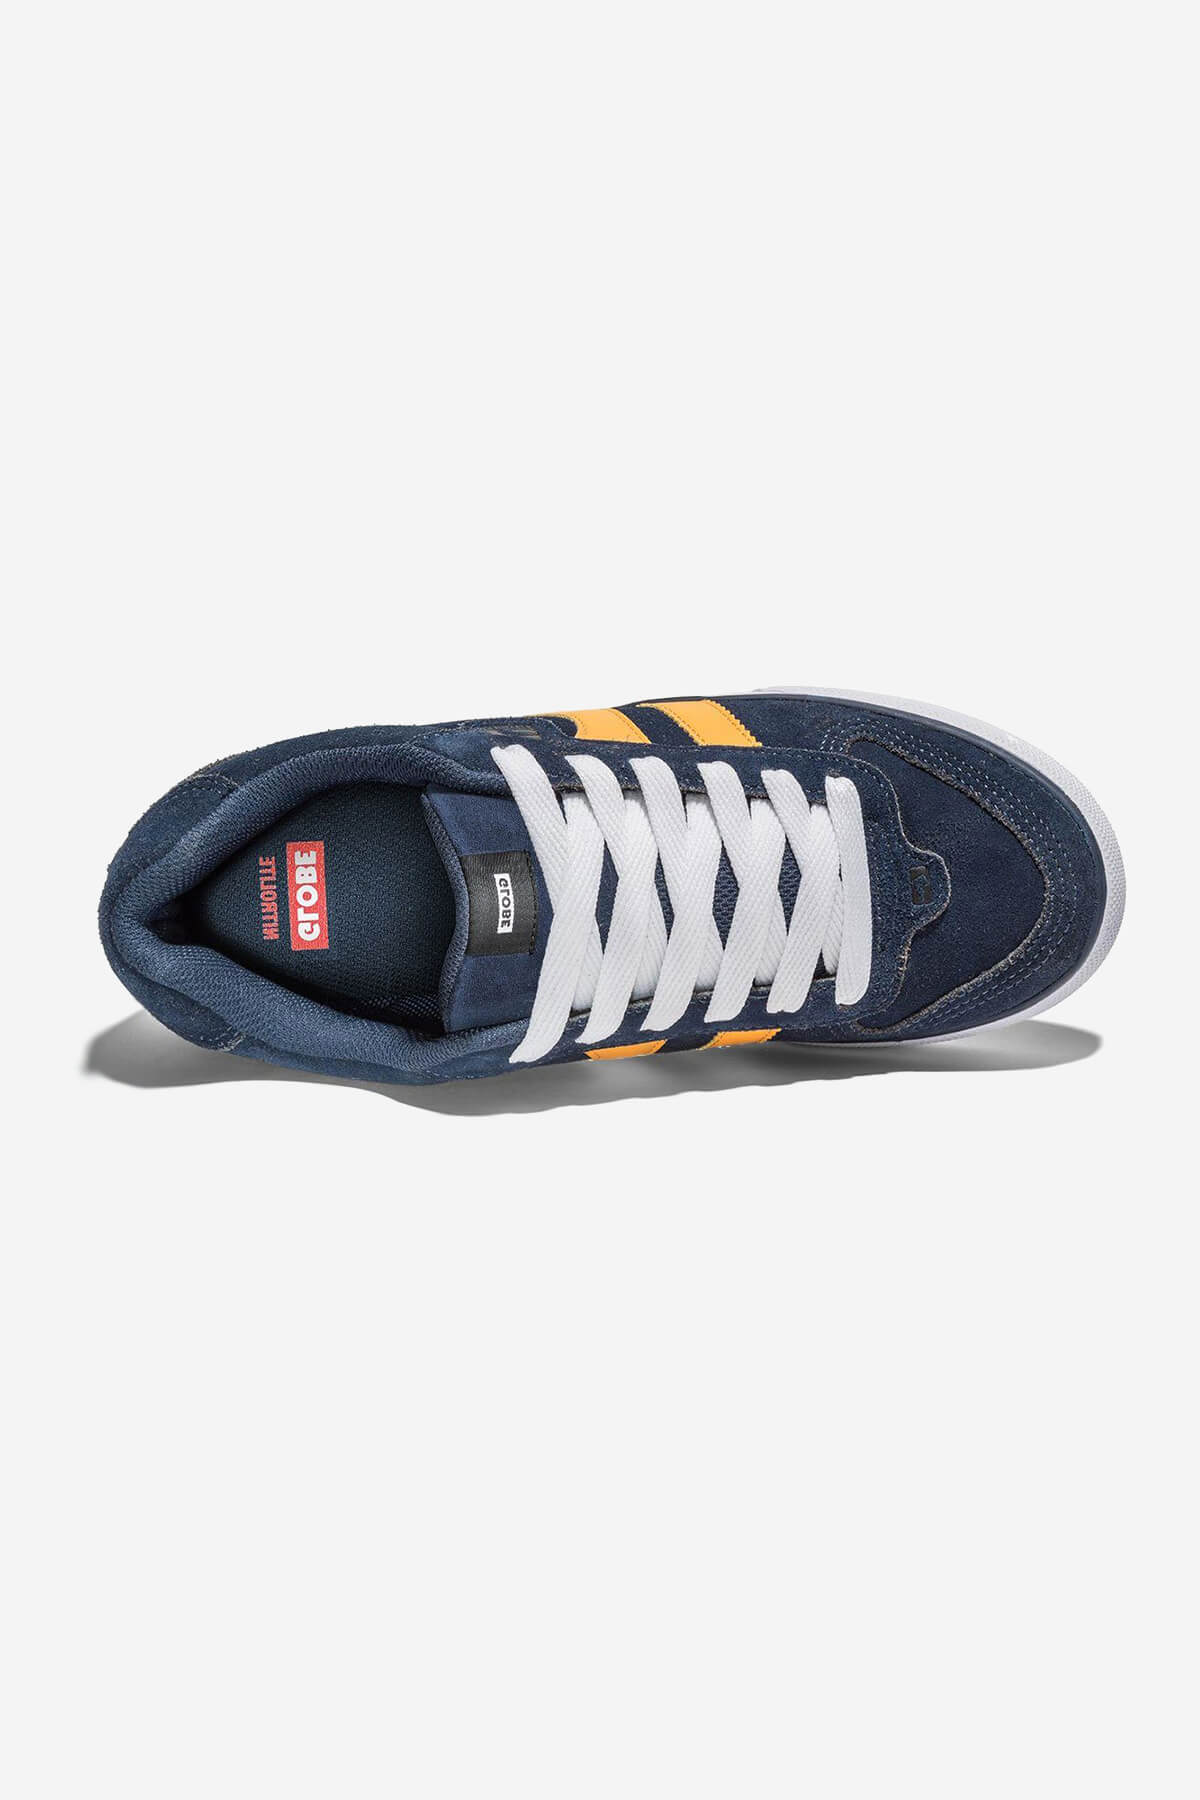 encore-2 navy yellow skate shoes